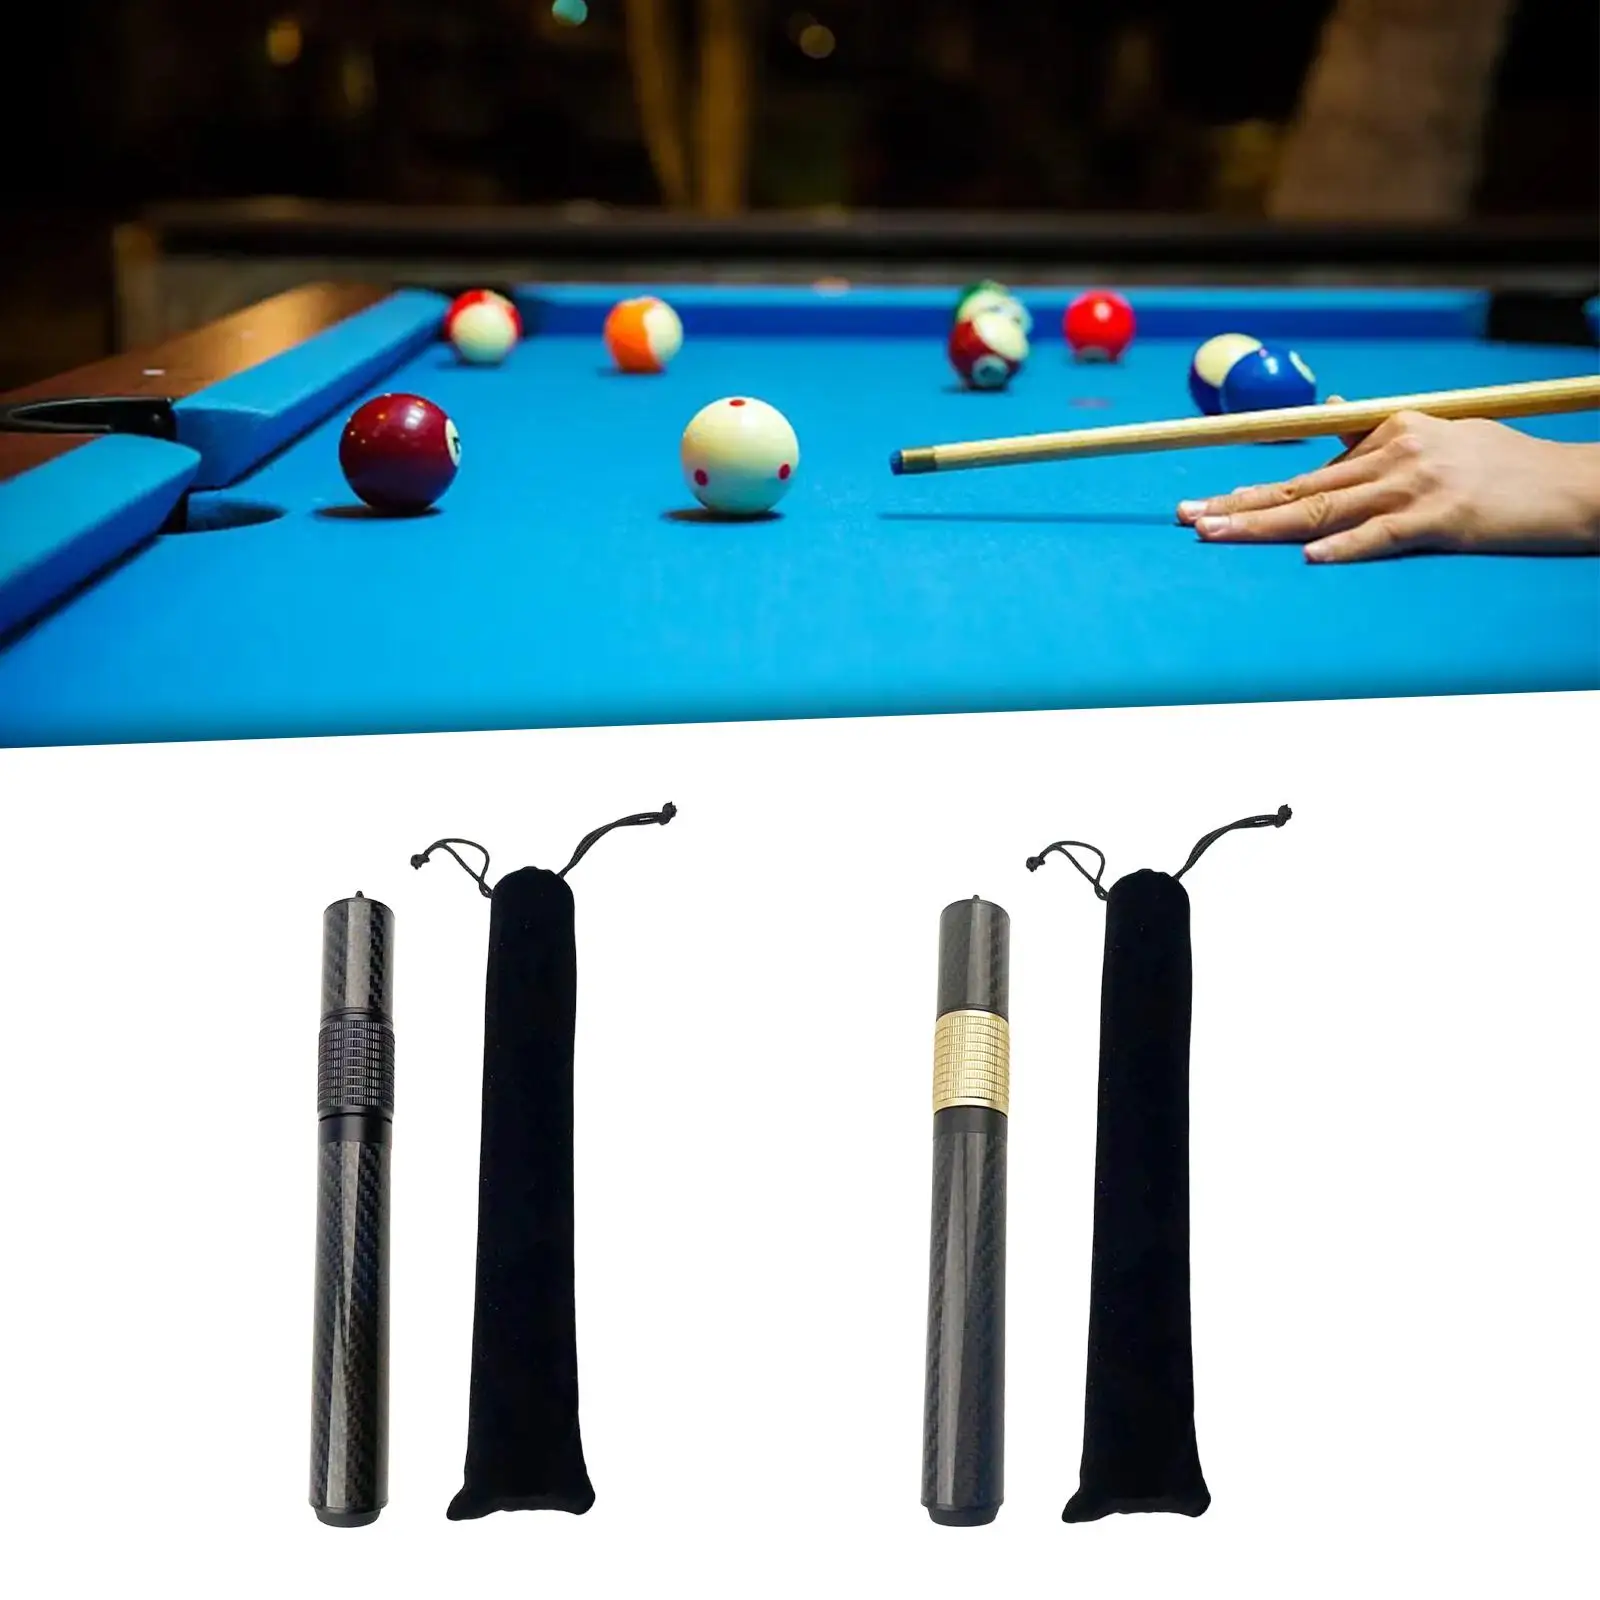 Billiards Pool Cue Extension Lengthen Tools 9.45in~13.39in Billiards Accessories Adjustable for Professional Enthusiast Lovers